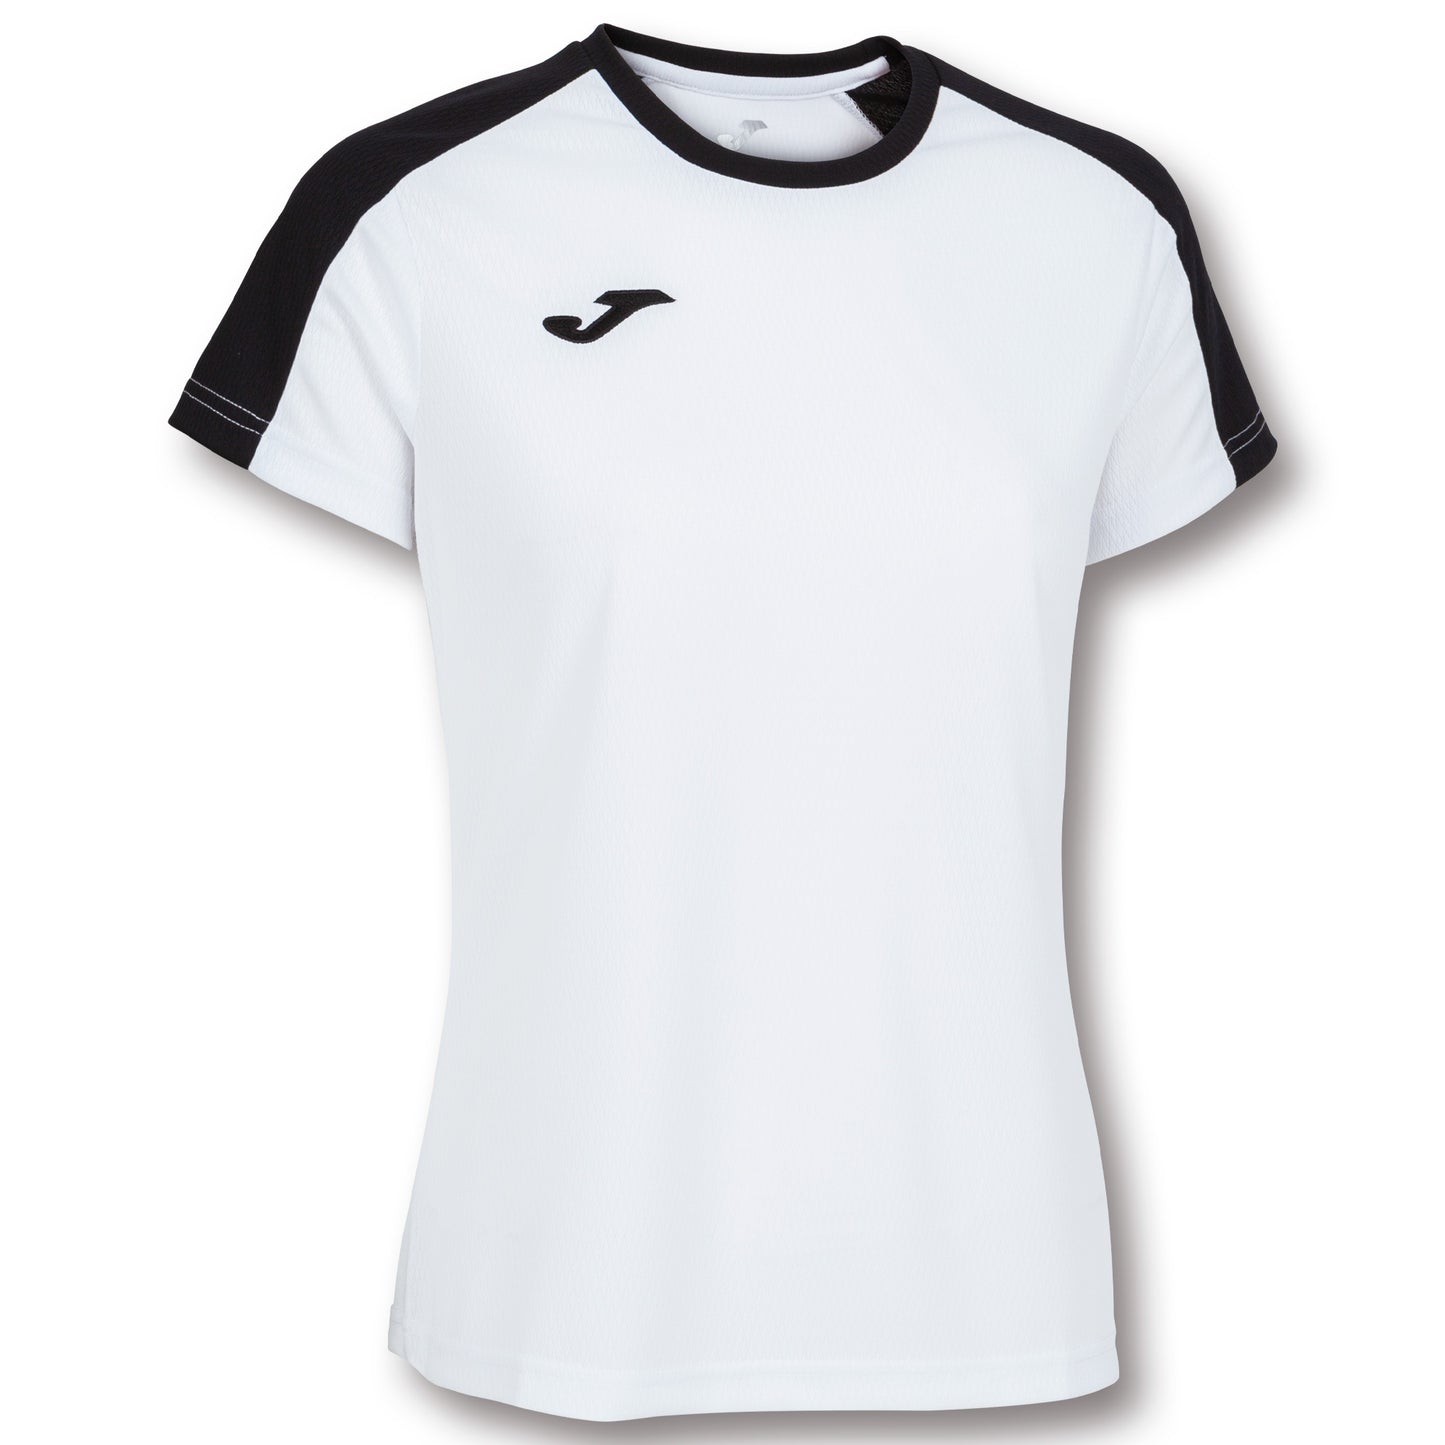 Joma Soccer Jersey available in Joma Canada Store. Customize your teamwear with sponsors and numbers. Joma is shipping in Canada. For club offers contact us. 